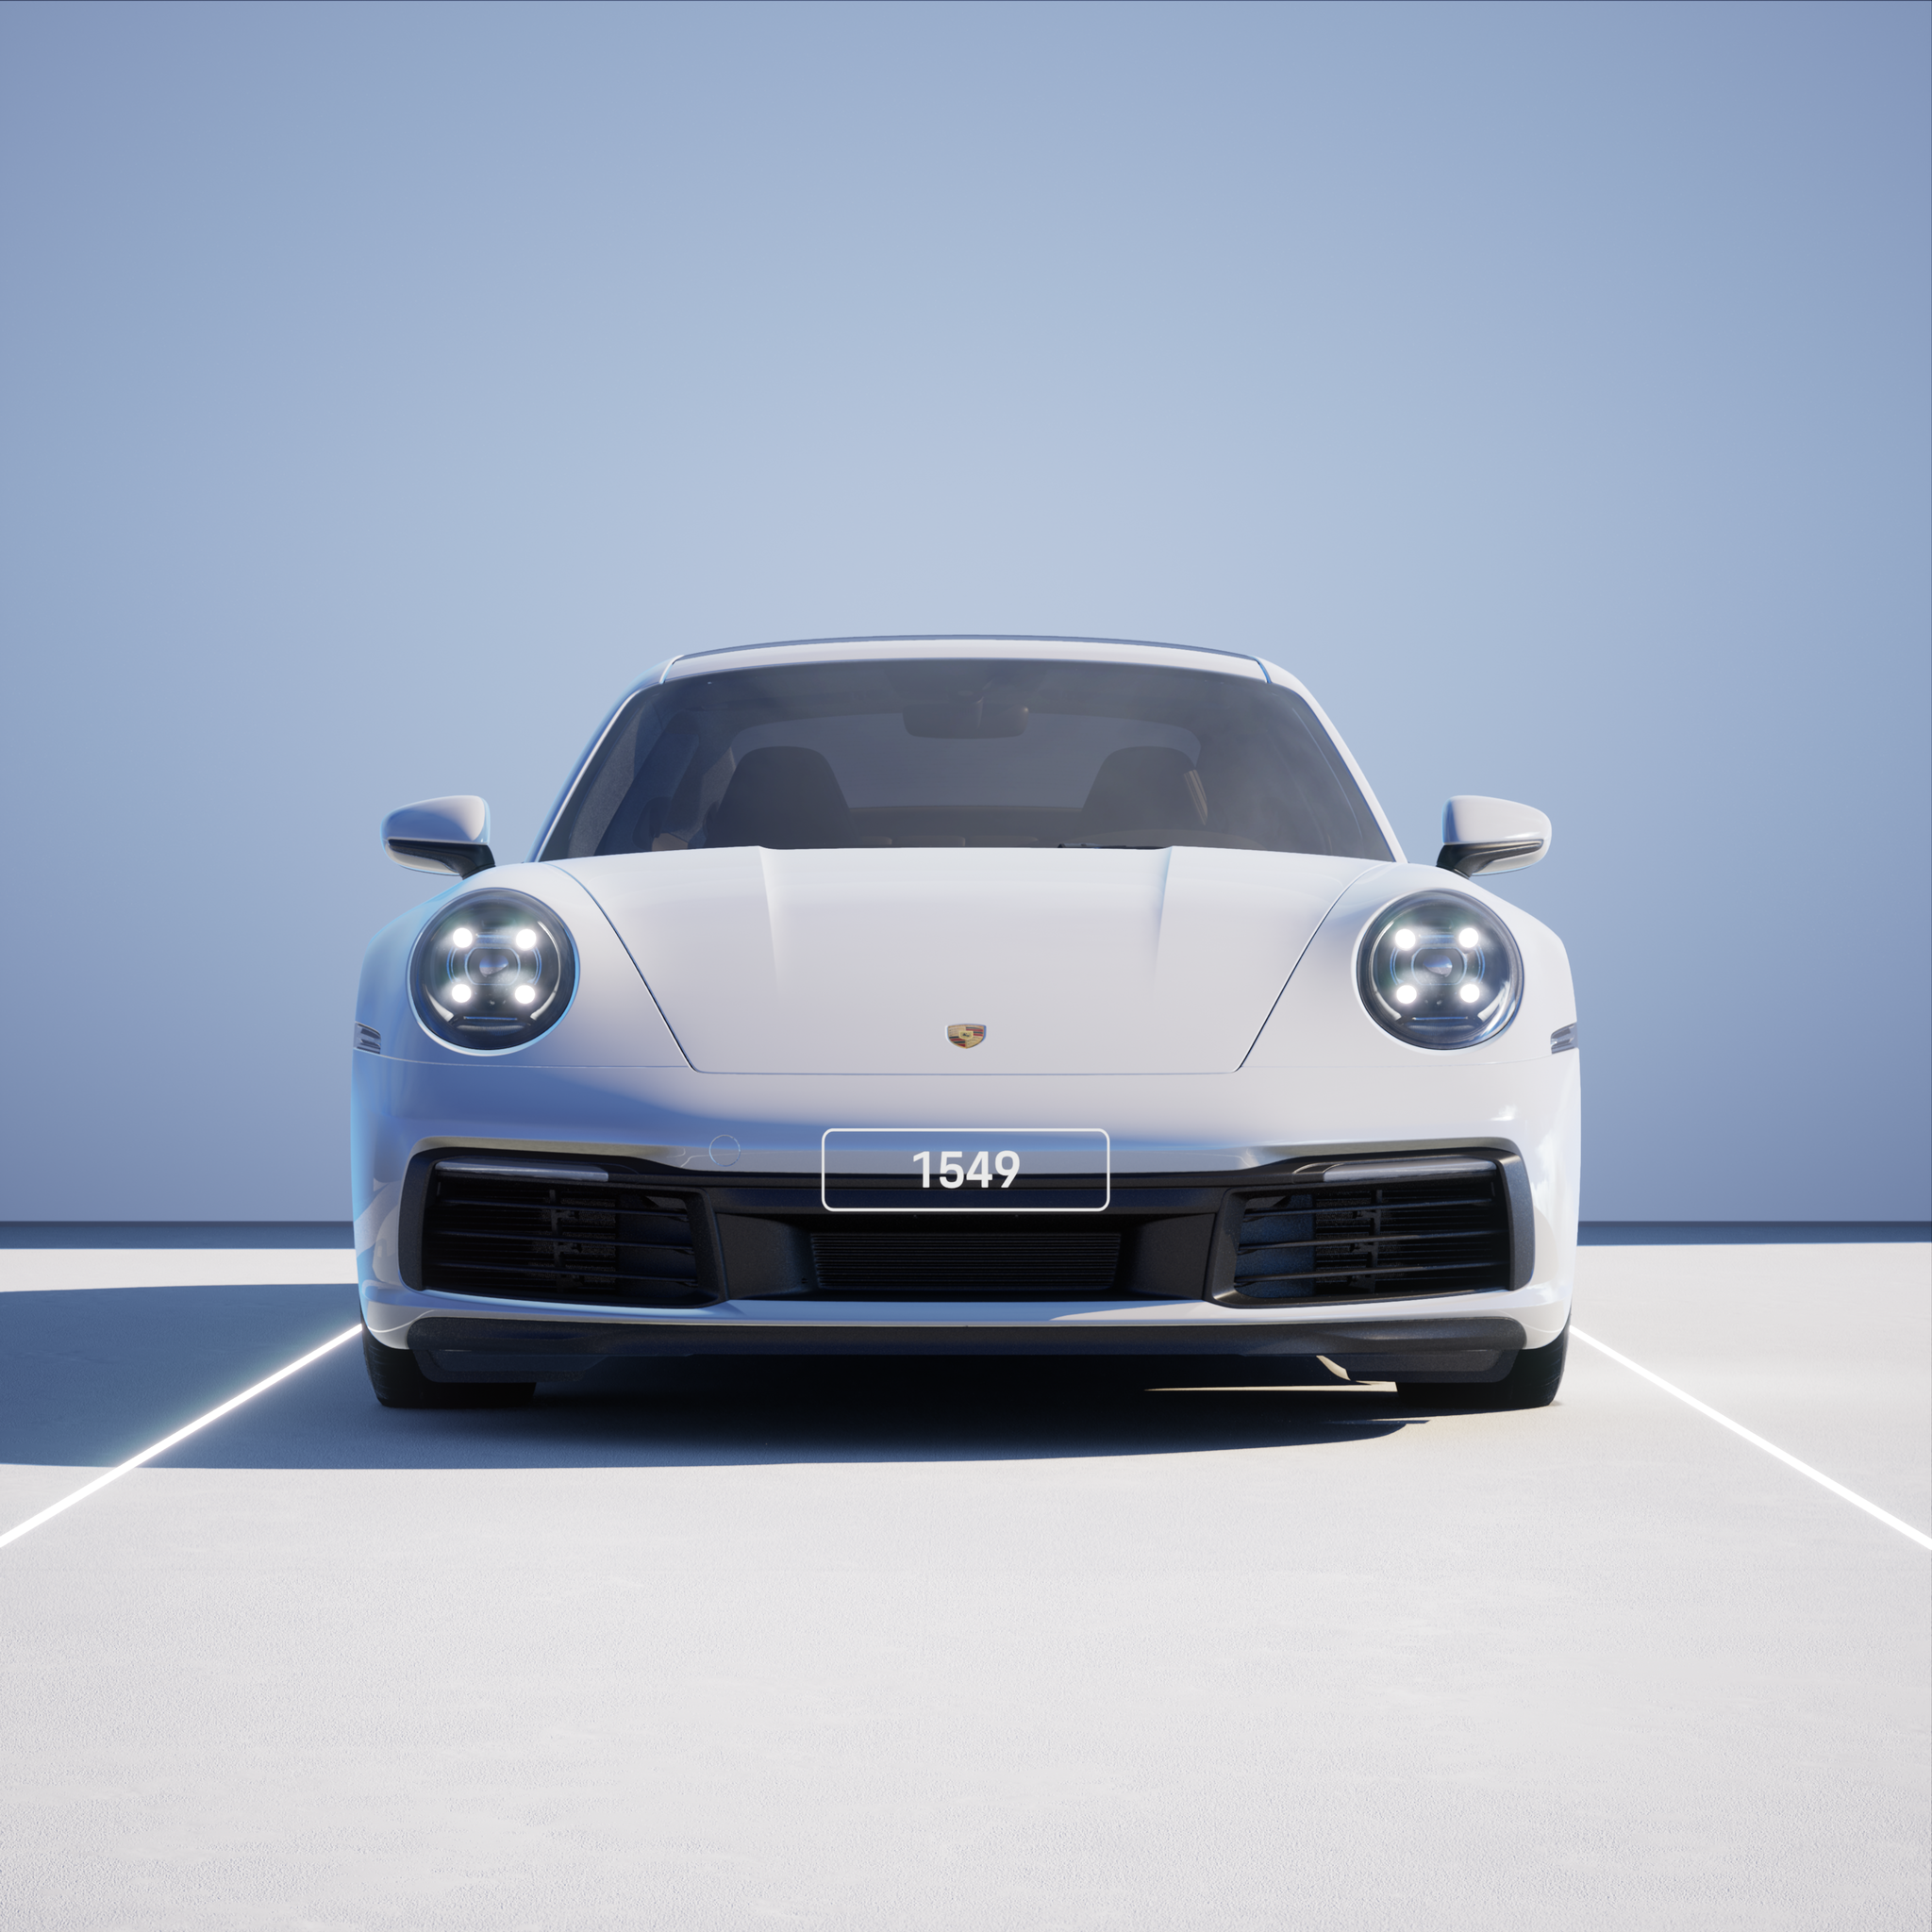 The PORSCHΞ 911 1549 image in phase